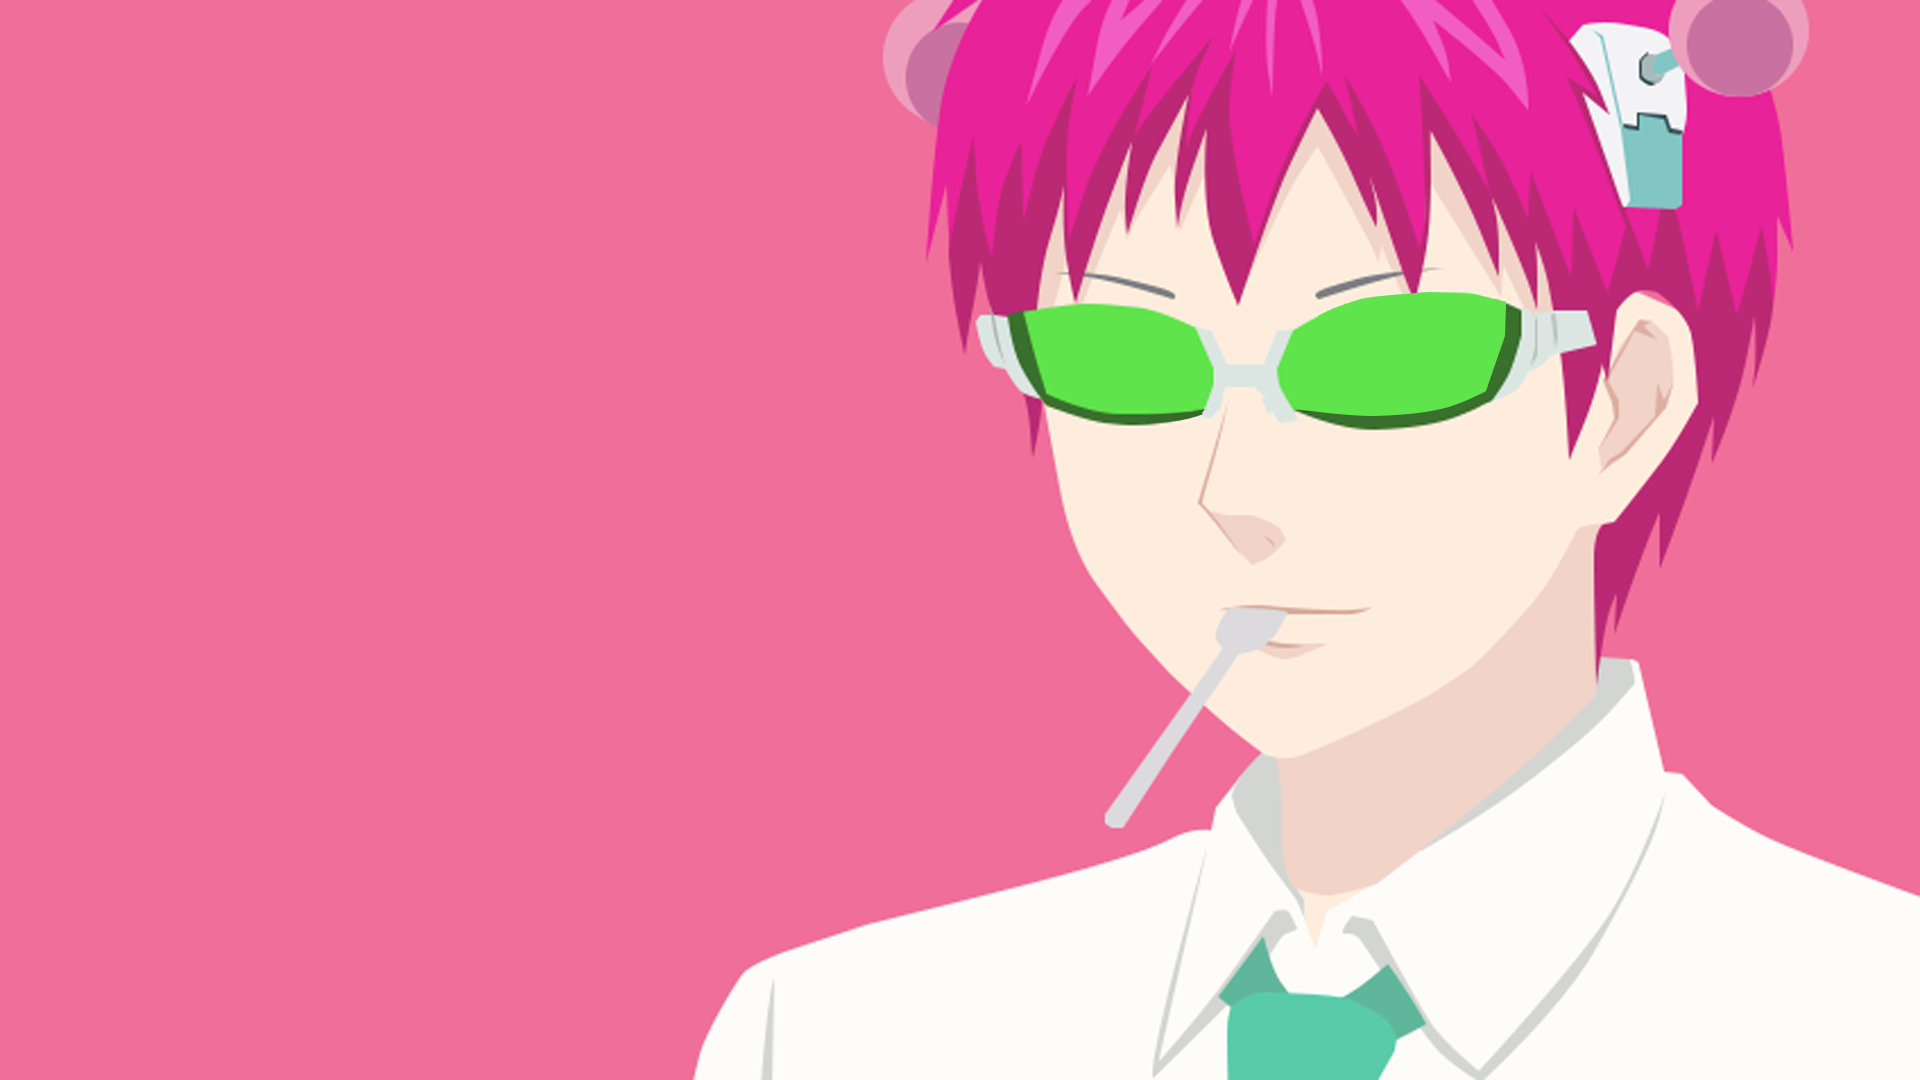 The Disastrous Life of Saiki K. Picture by YaMaKEN - Image A